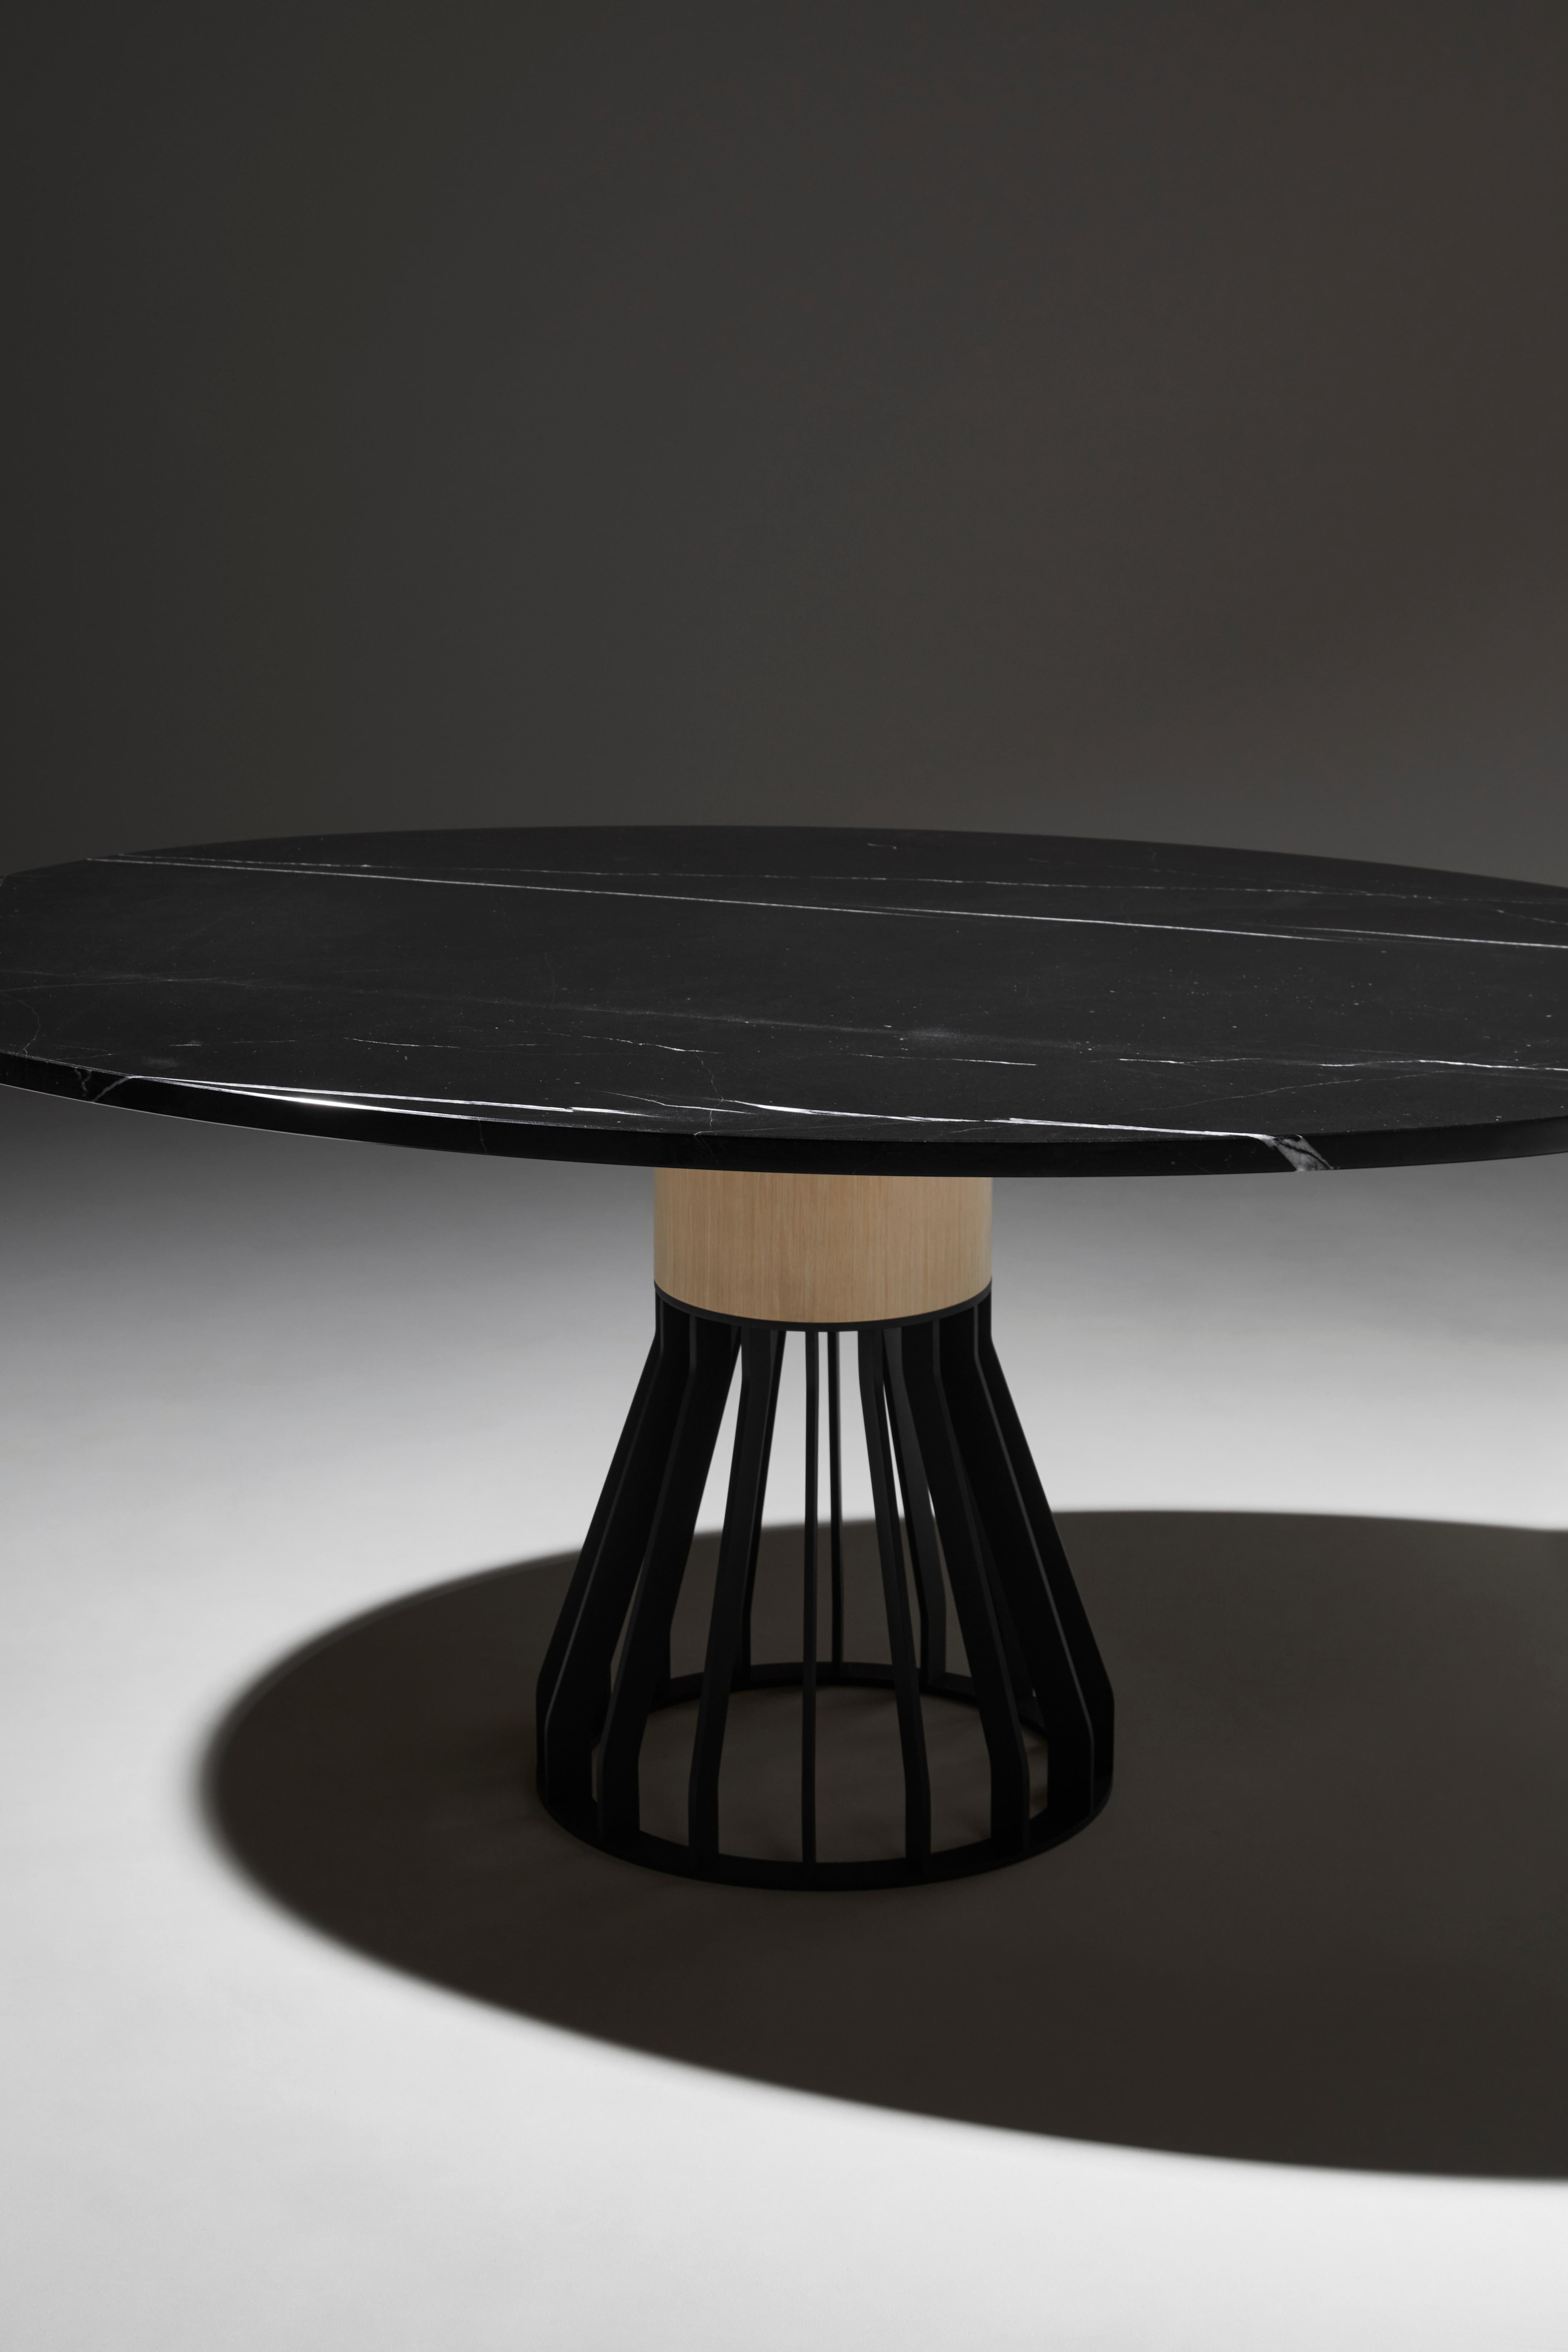 Mewoma is a family of tables with a sculptural presence.
The table combines a laser cut metal base topped by a large wooden column supporting the marble top.
The three materials gave the table its name : metal (ME), wood (WO) and marble